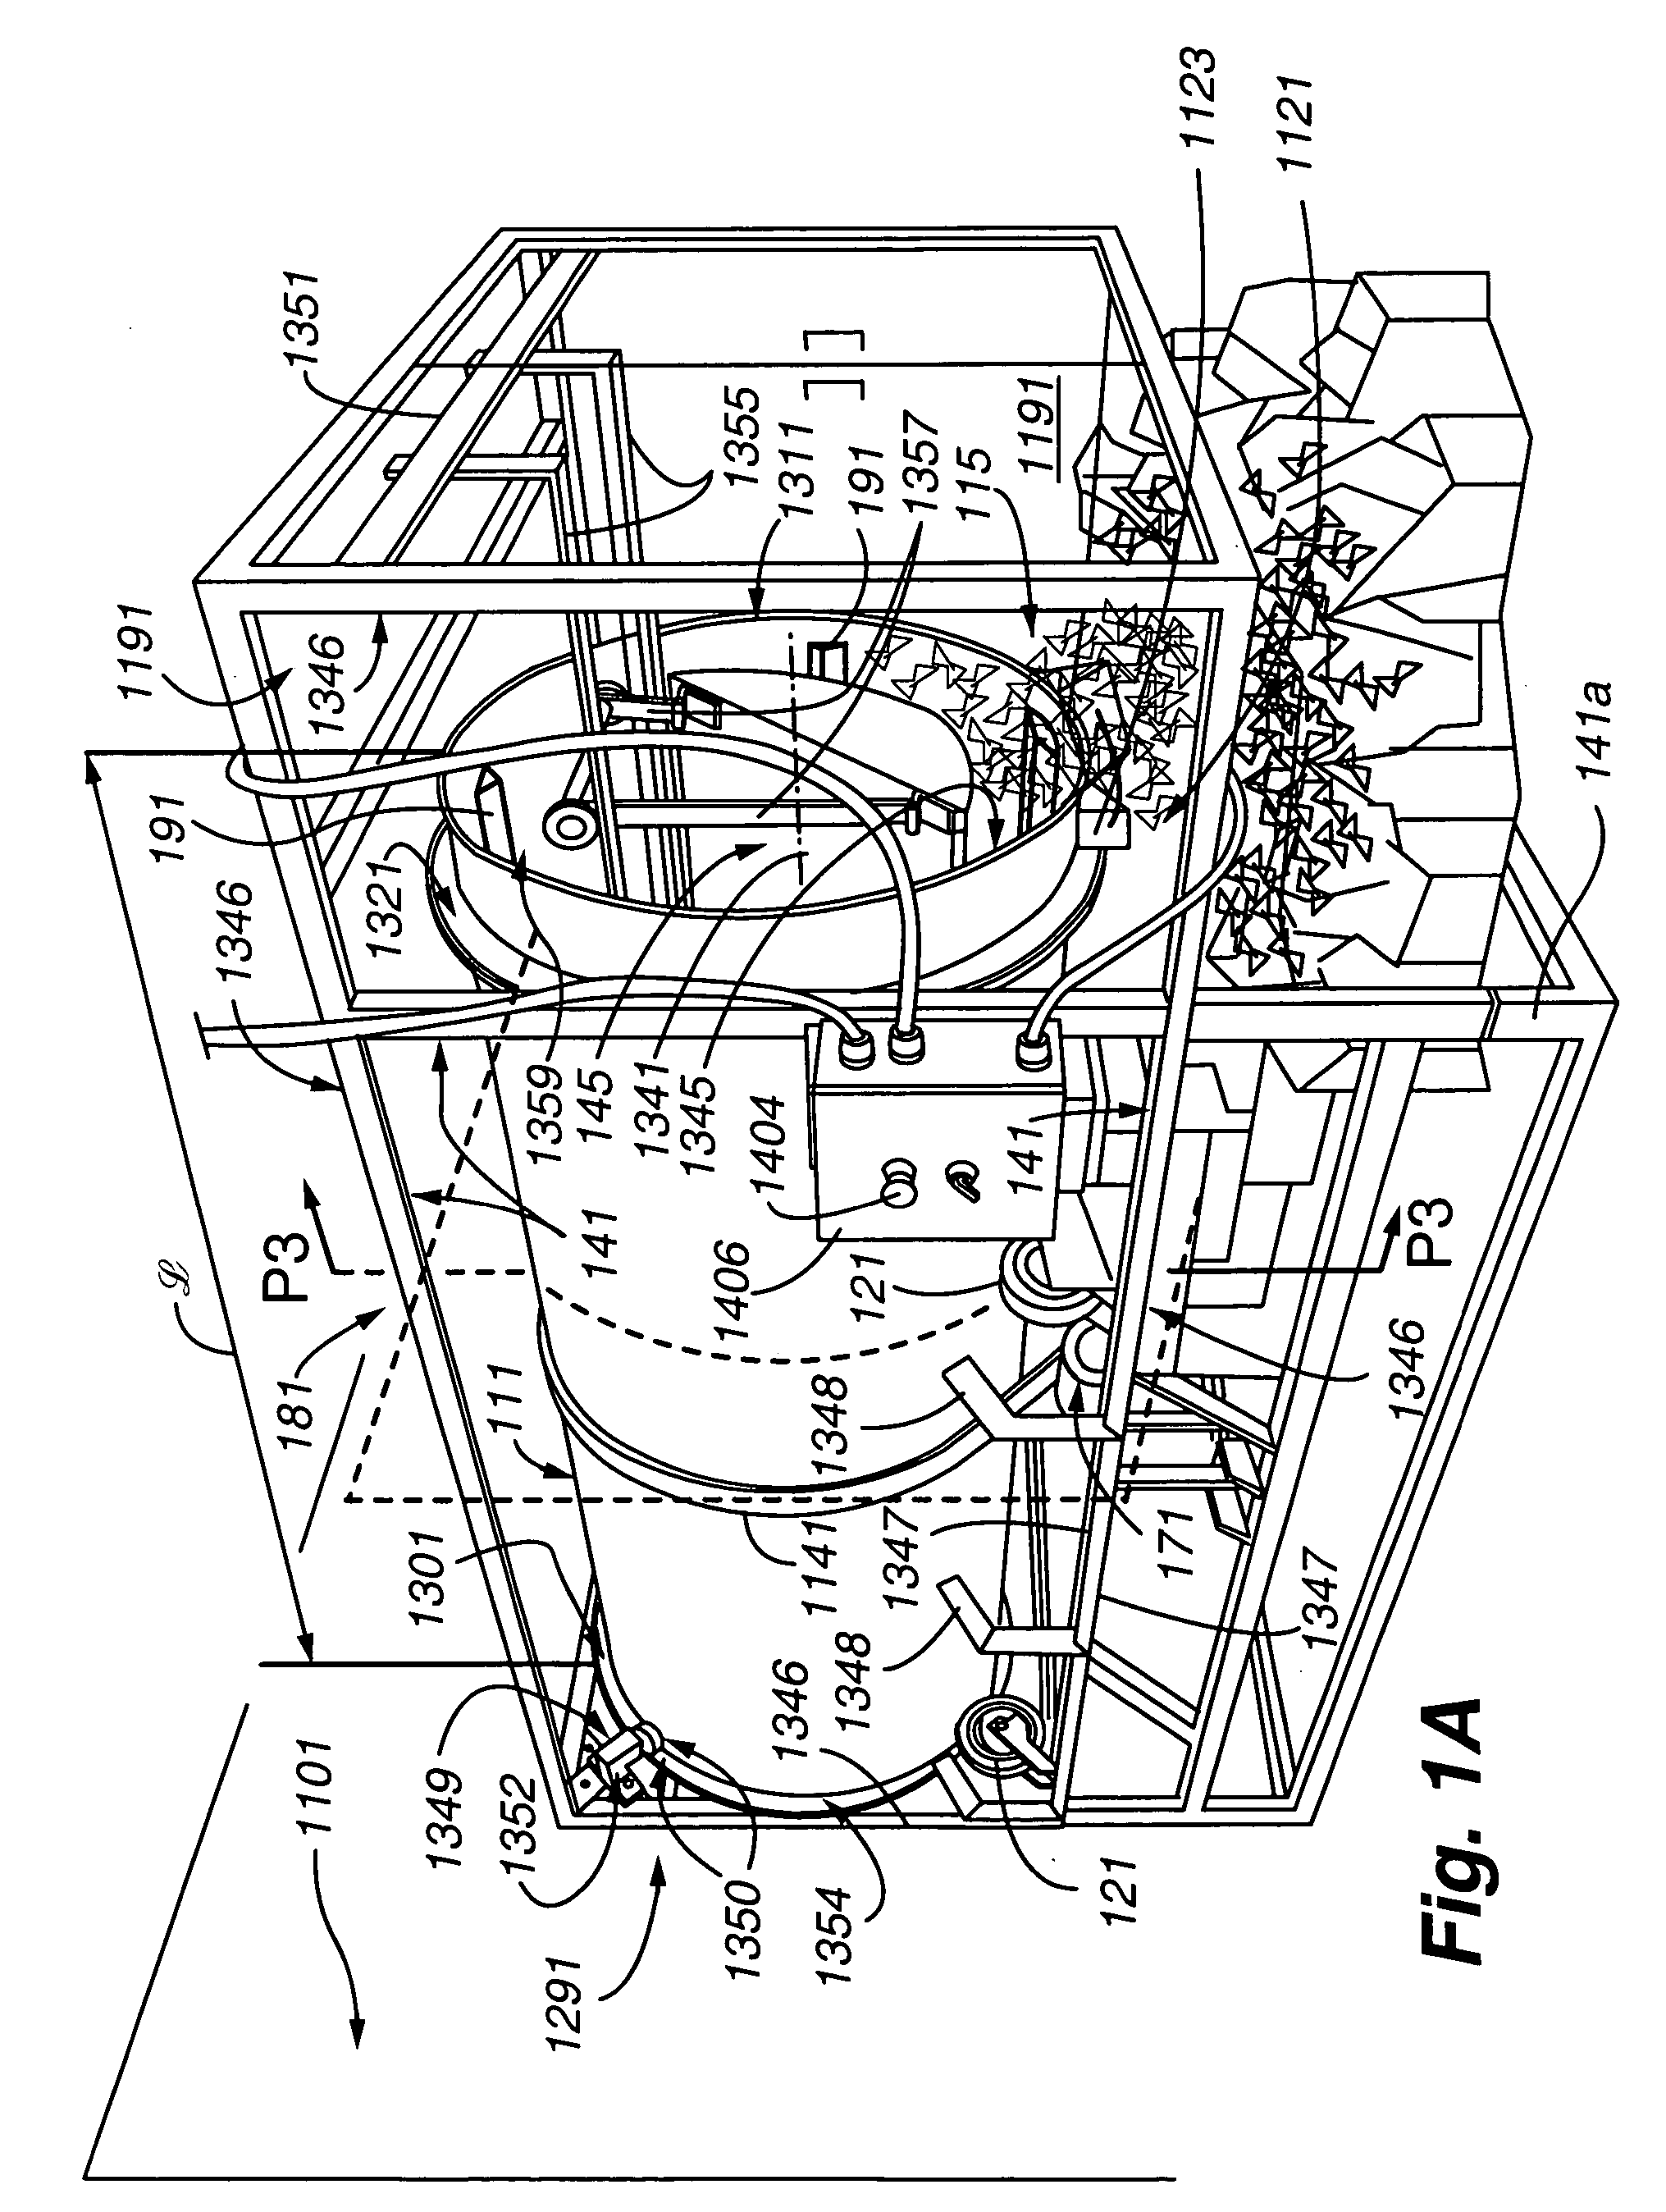 Food product surface sterilization apparatus and method